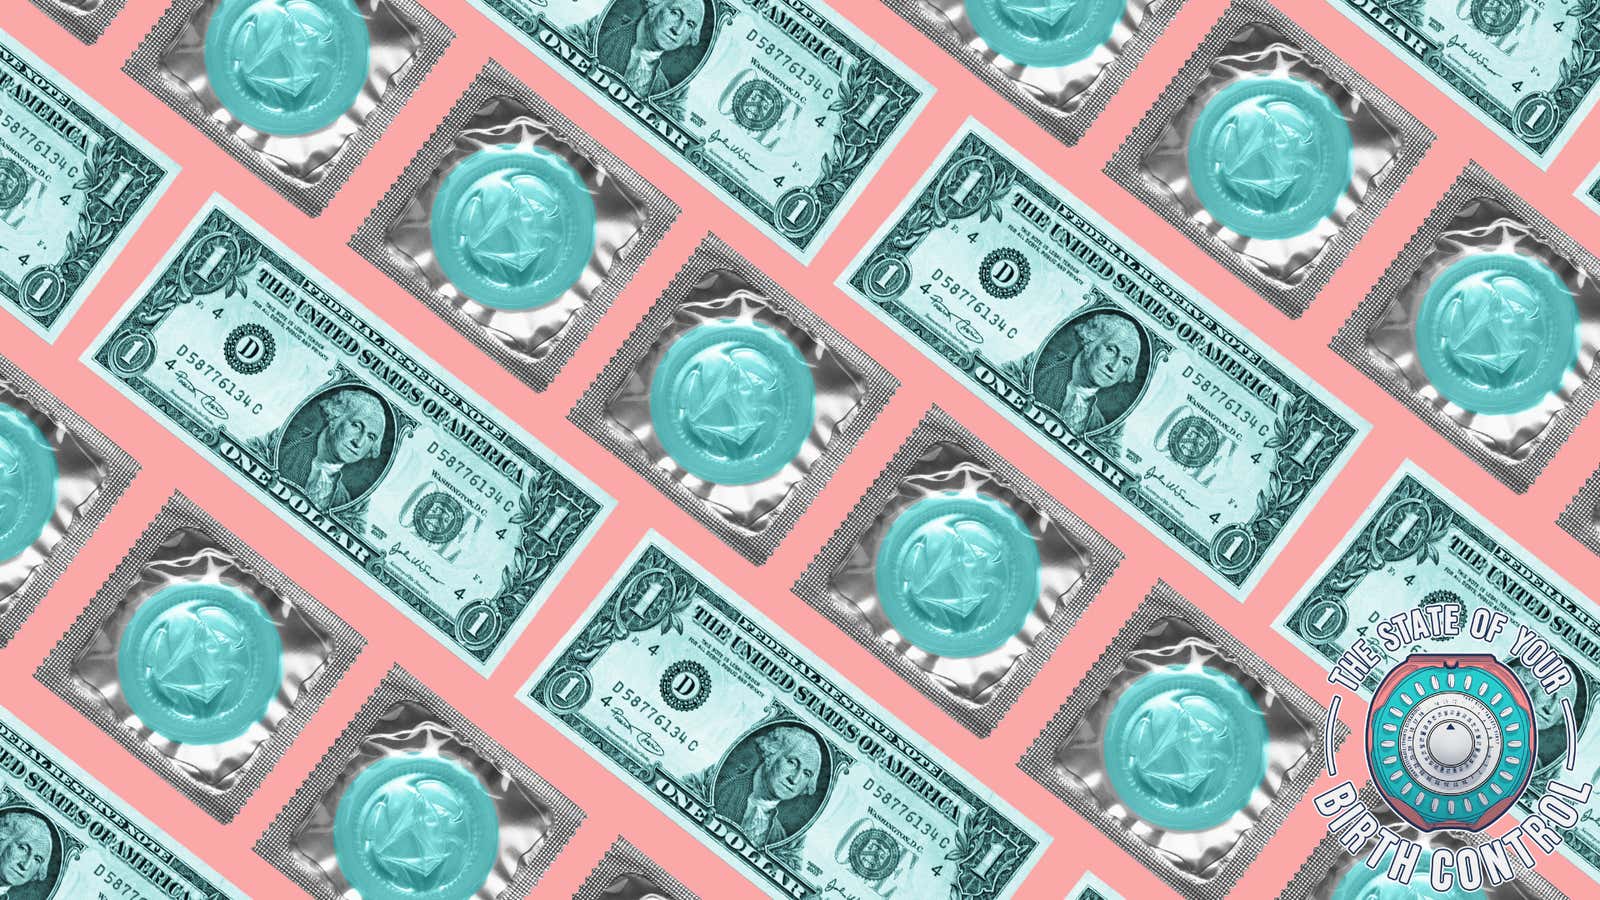 What Every Type of Birth Control Costs